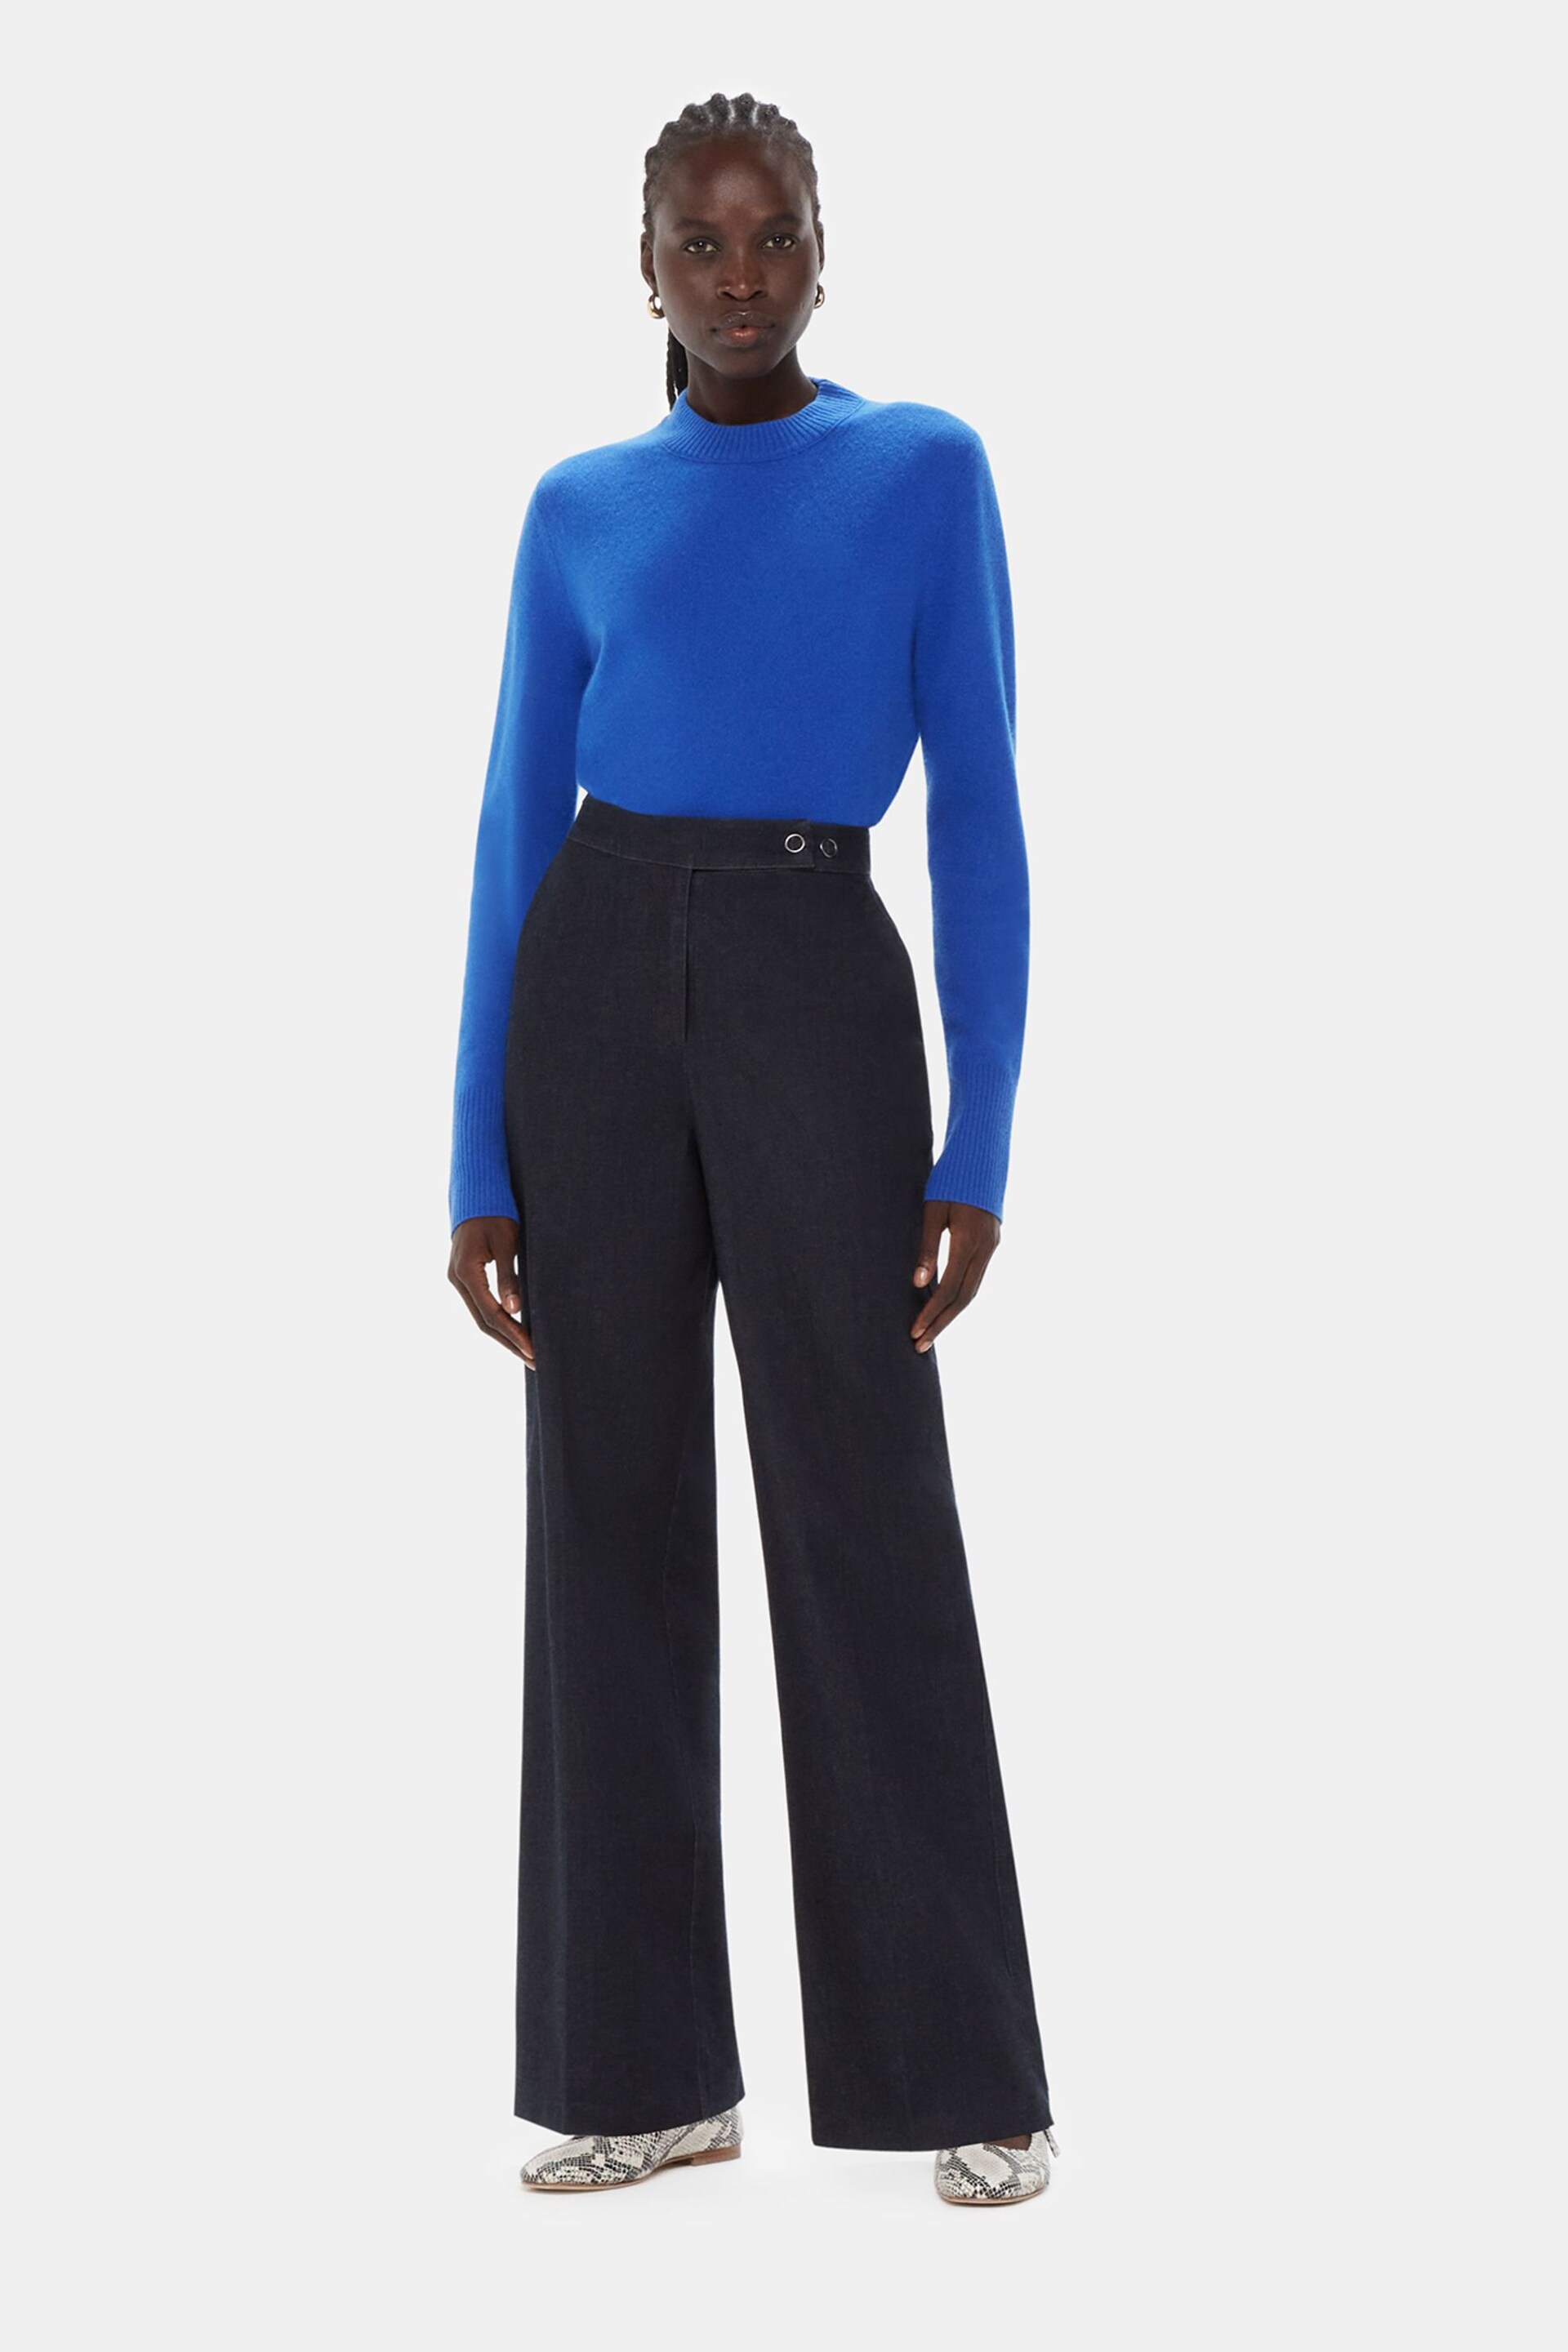 Whistles Blue Joanna Denim Straight Trousers - Image 4 of 5